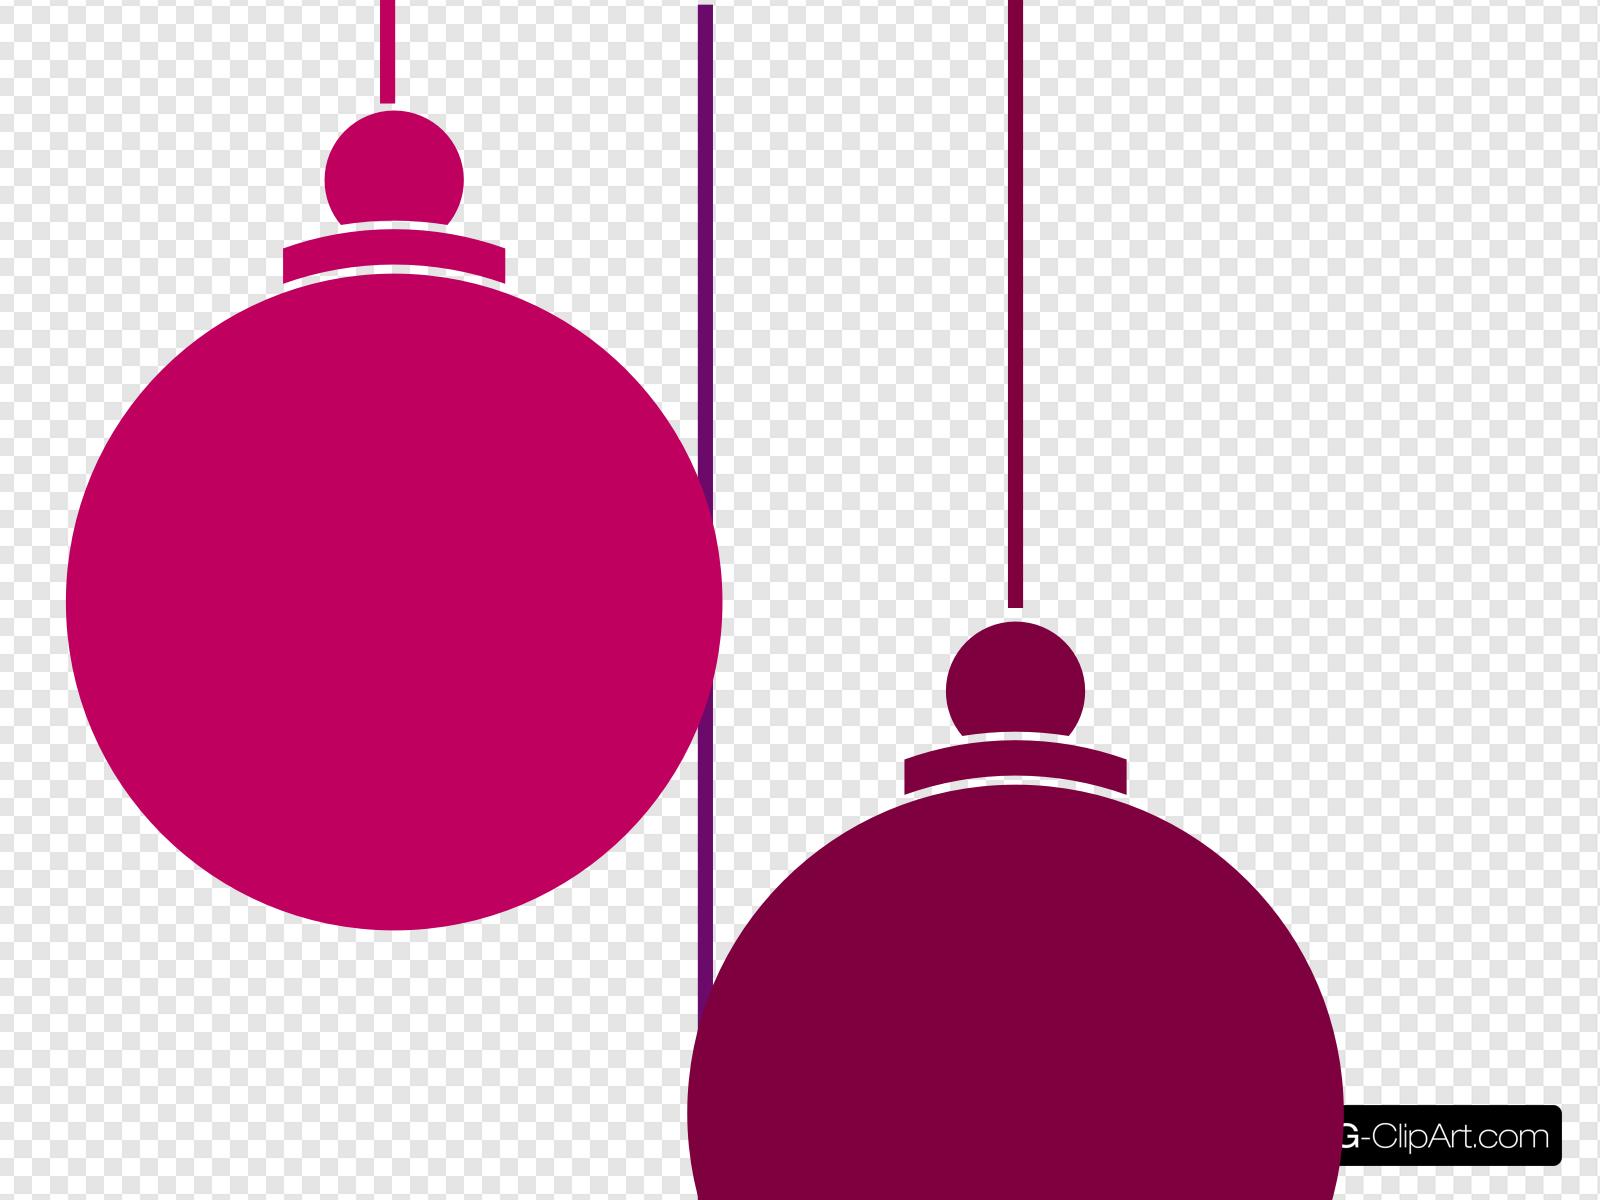 Christmas Ornaments Clip art, Icon and SVG